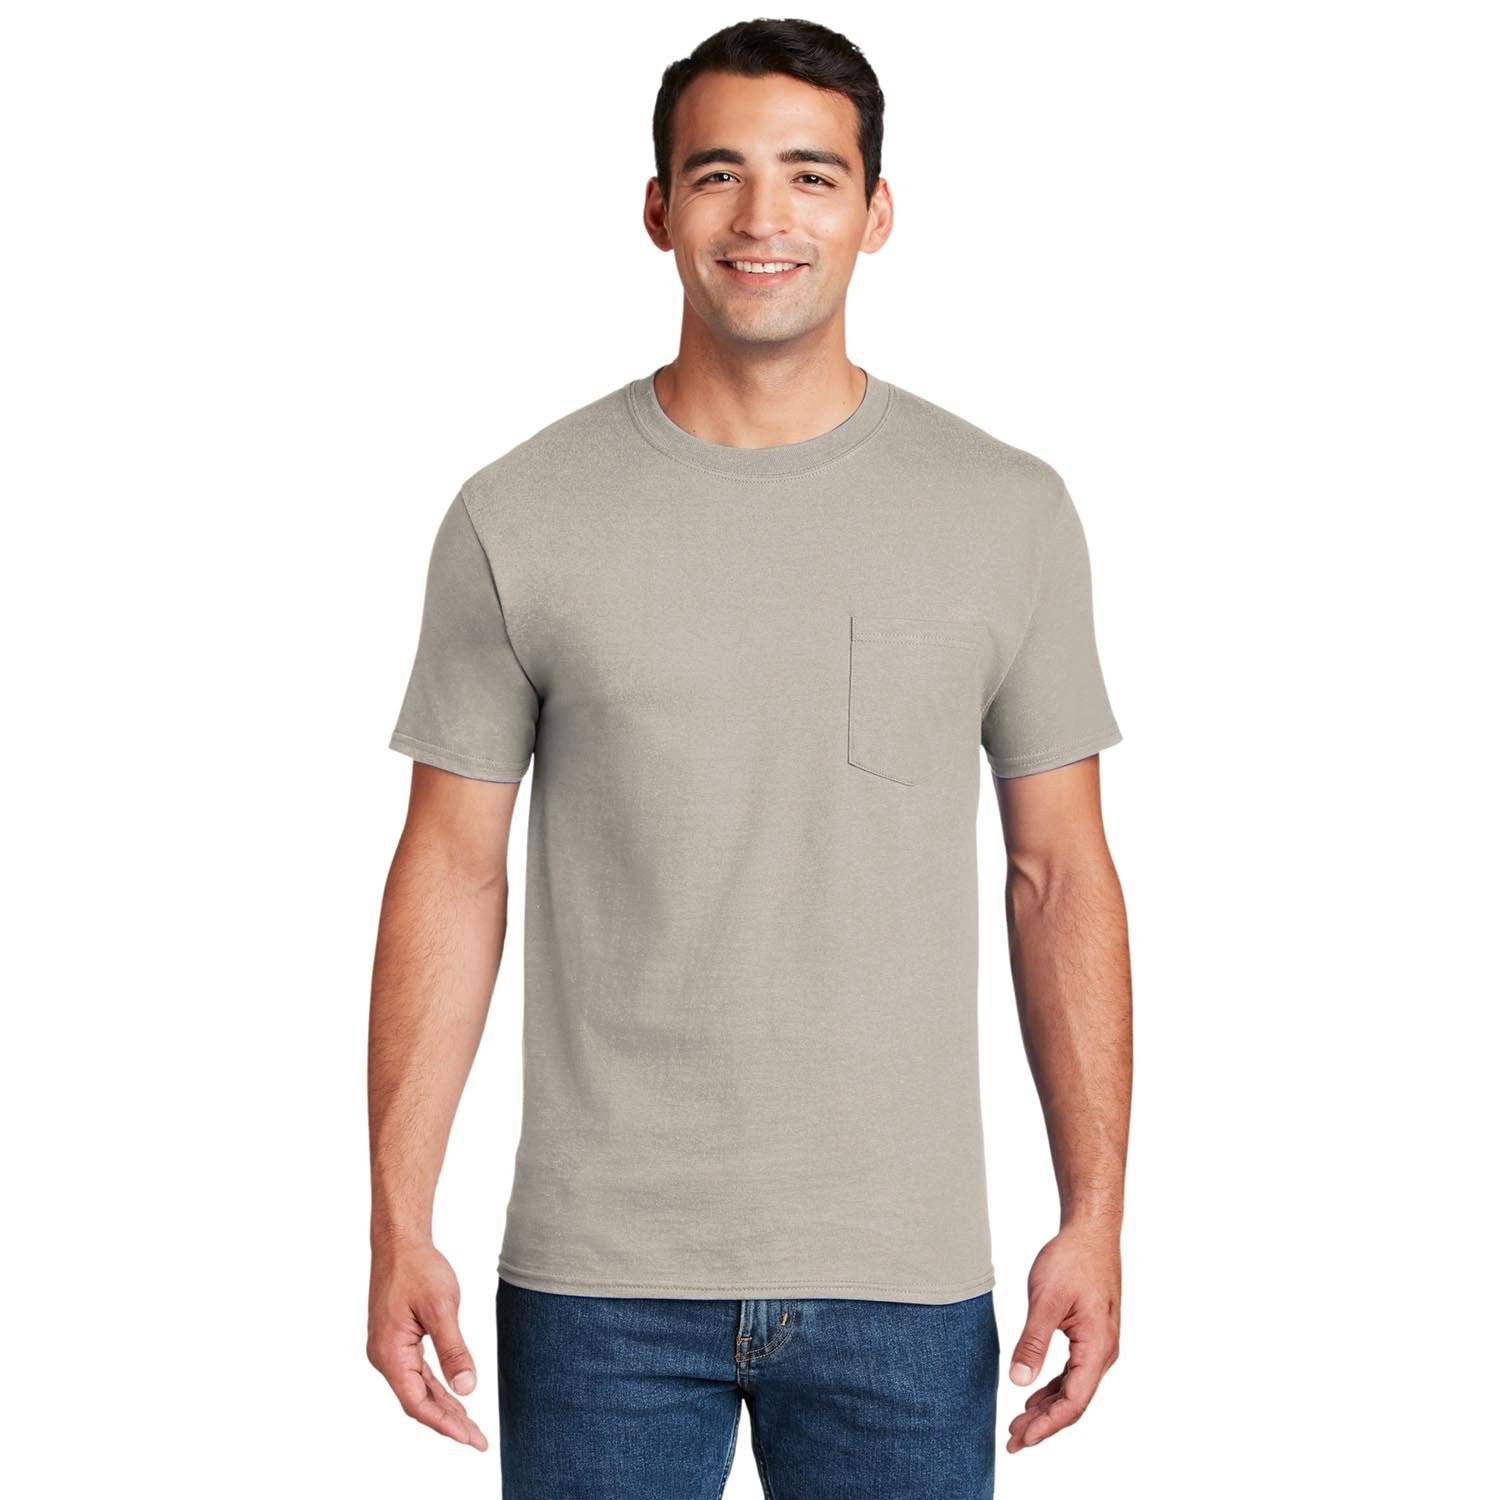 SanMar Hanes Beefy Cotton T-Shirt with Pocket